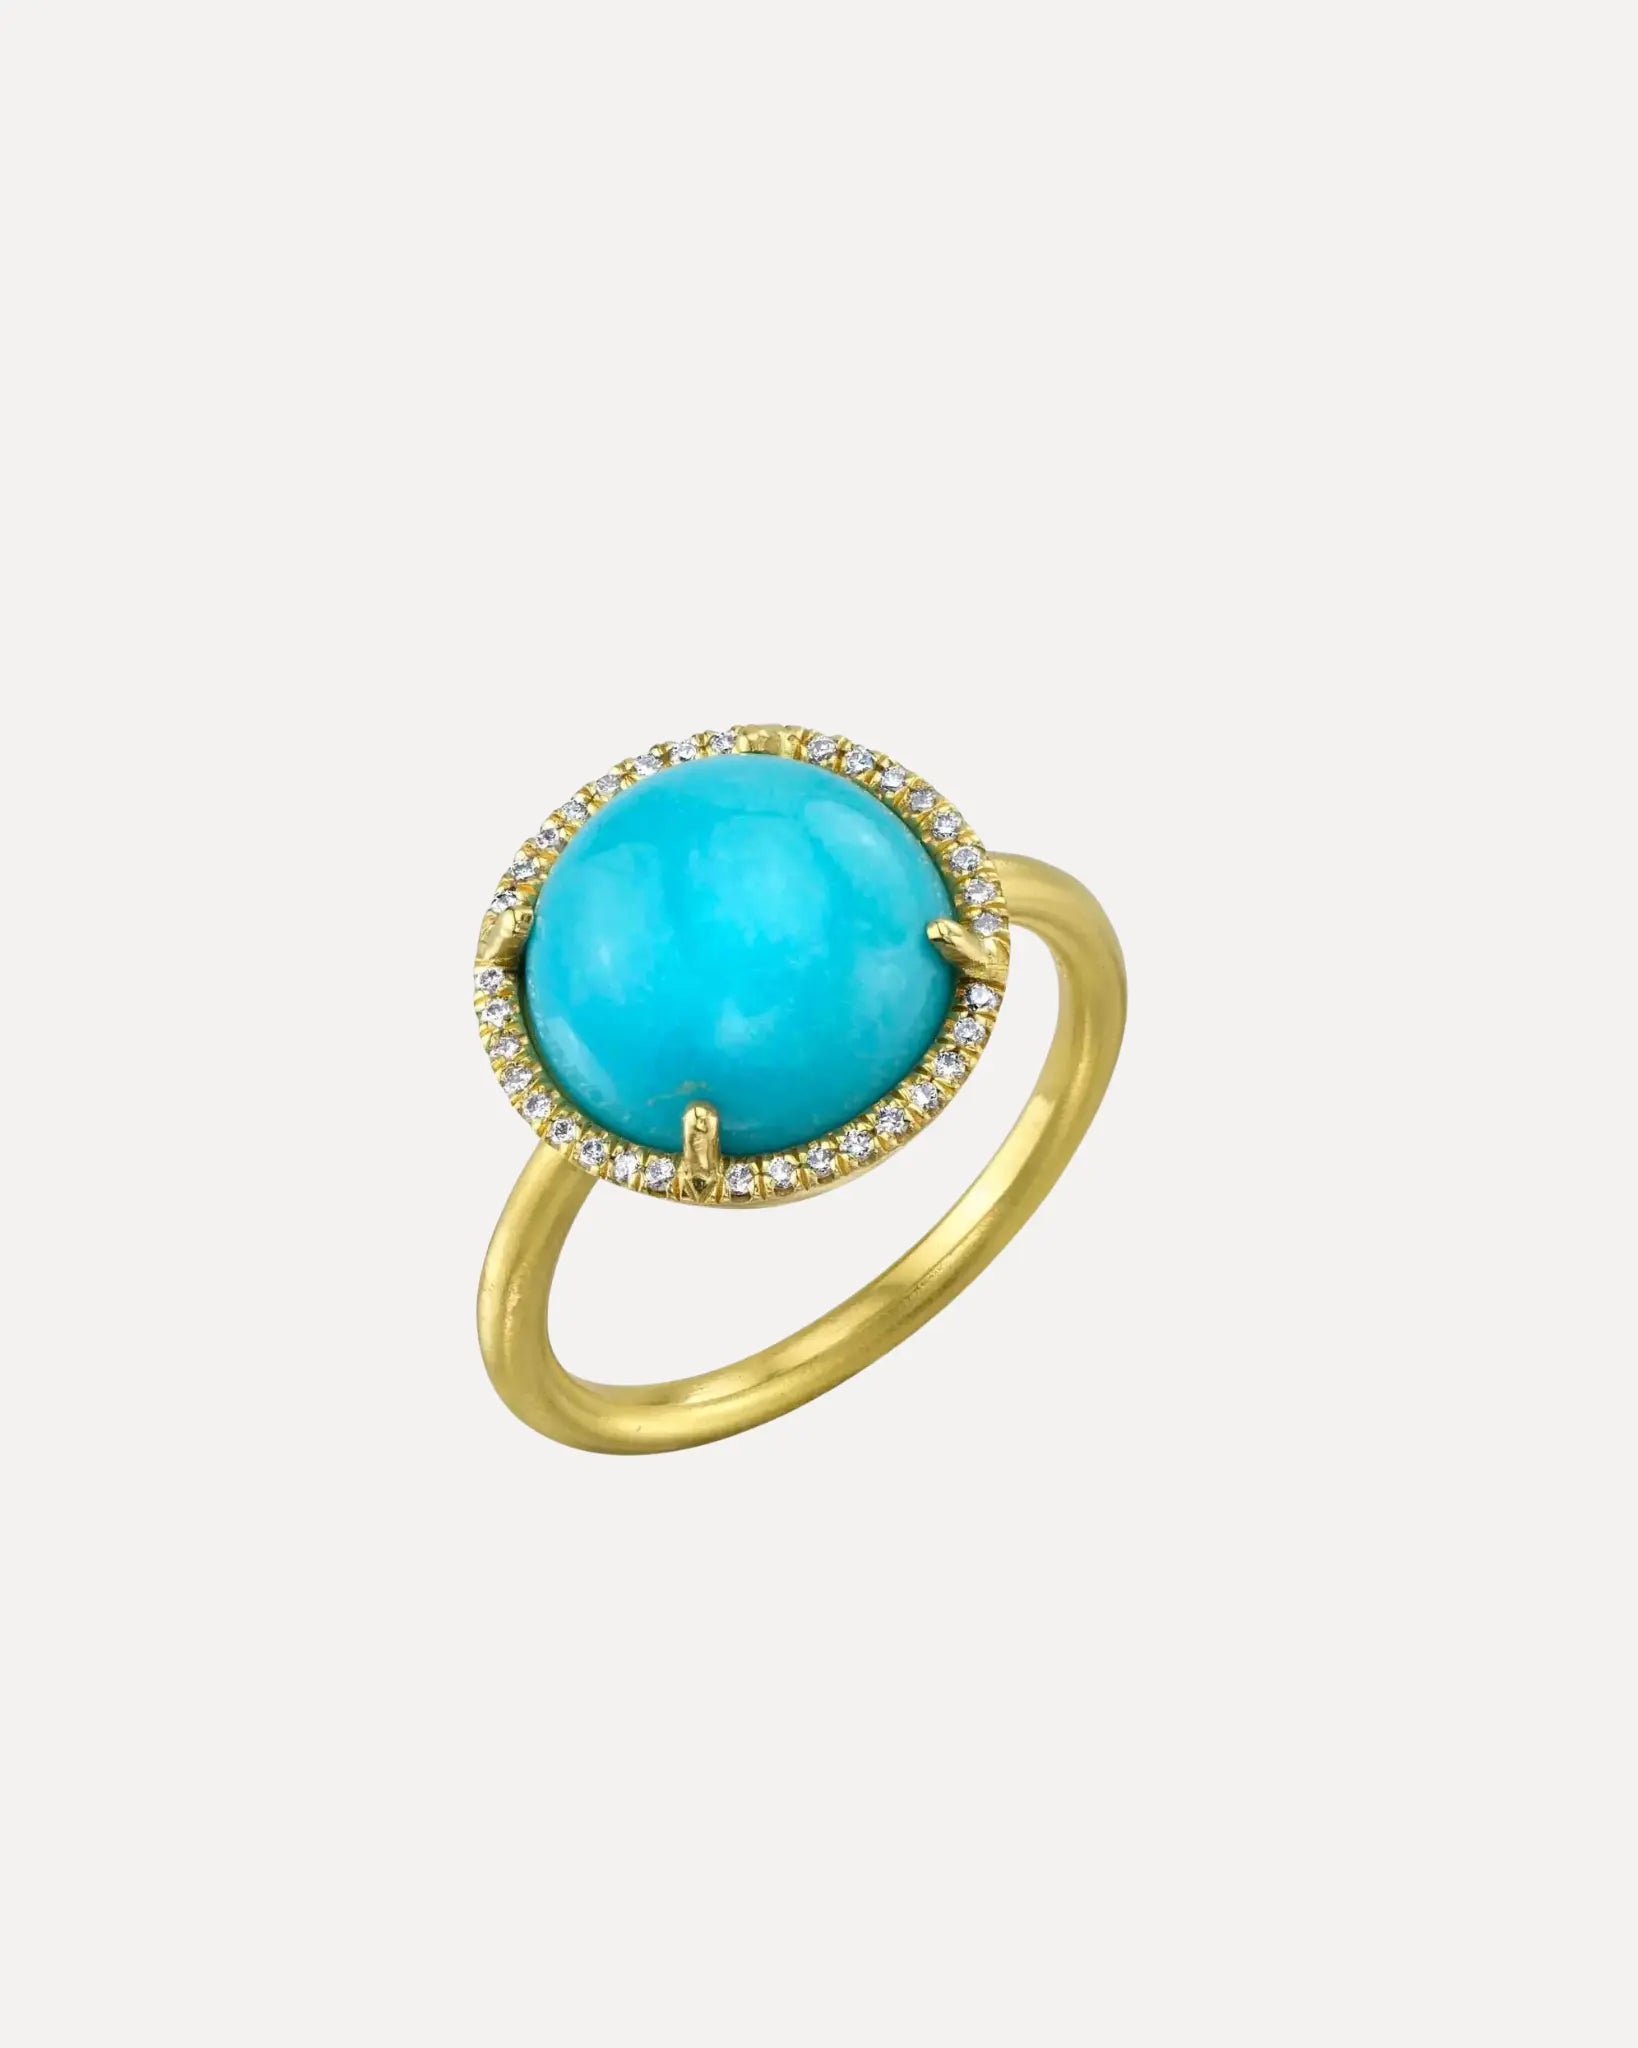 Turquoise and Pave Diamond Ring Turquoise and Pave Diamond Ring Irene Neuwirth Irene Neuwirth  Squash Blossom Vail